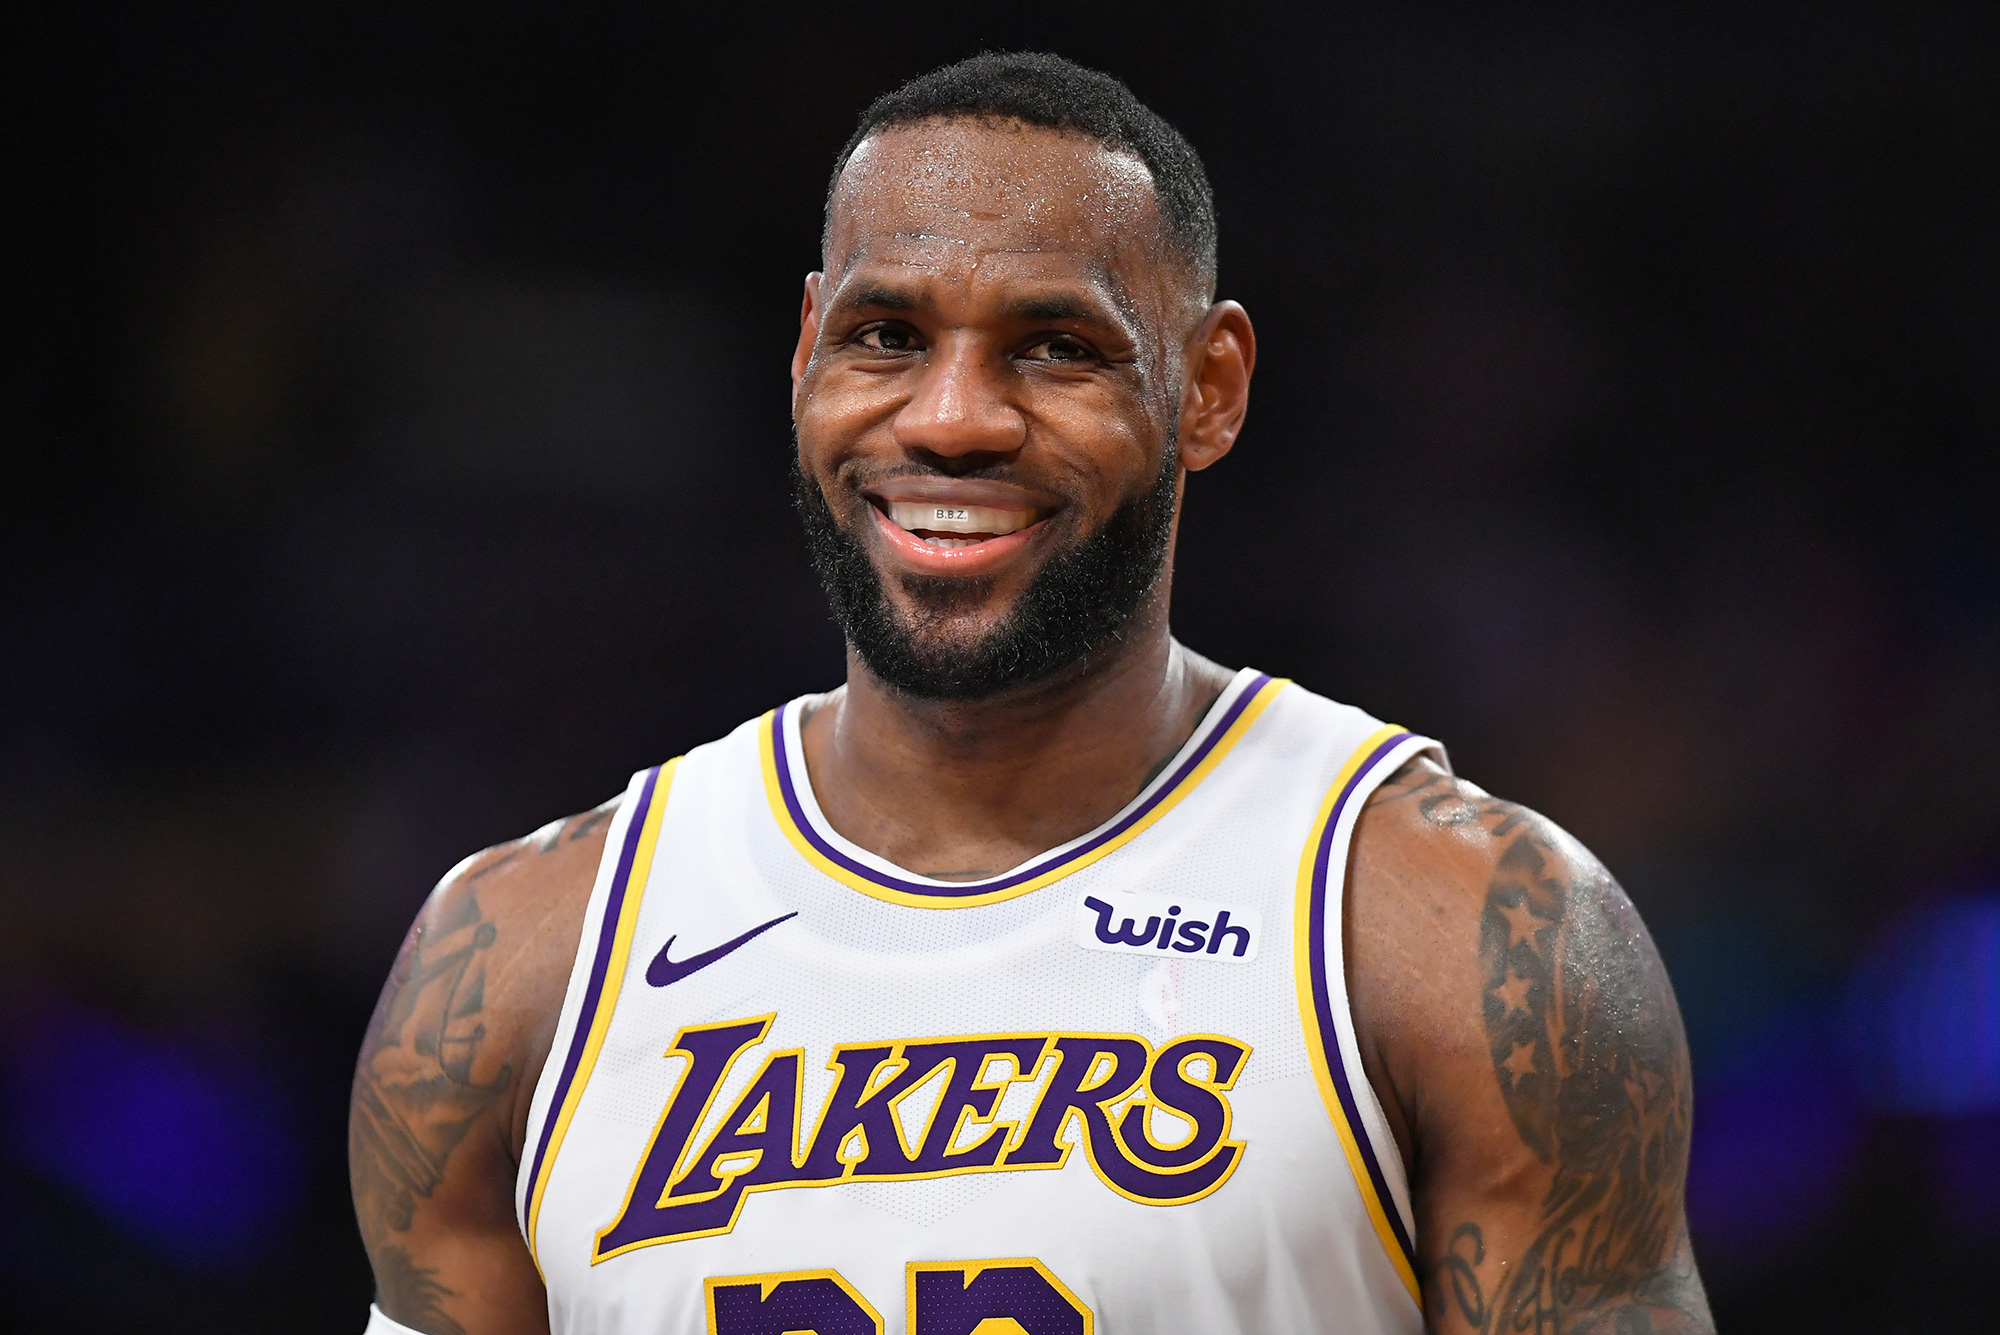 LeBron James biopic 'Shooting Stars' to film in Cleveland and